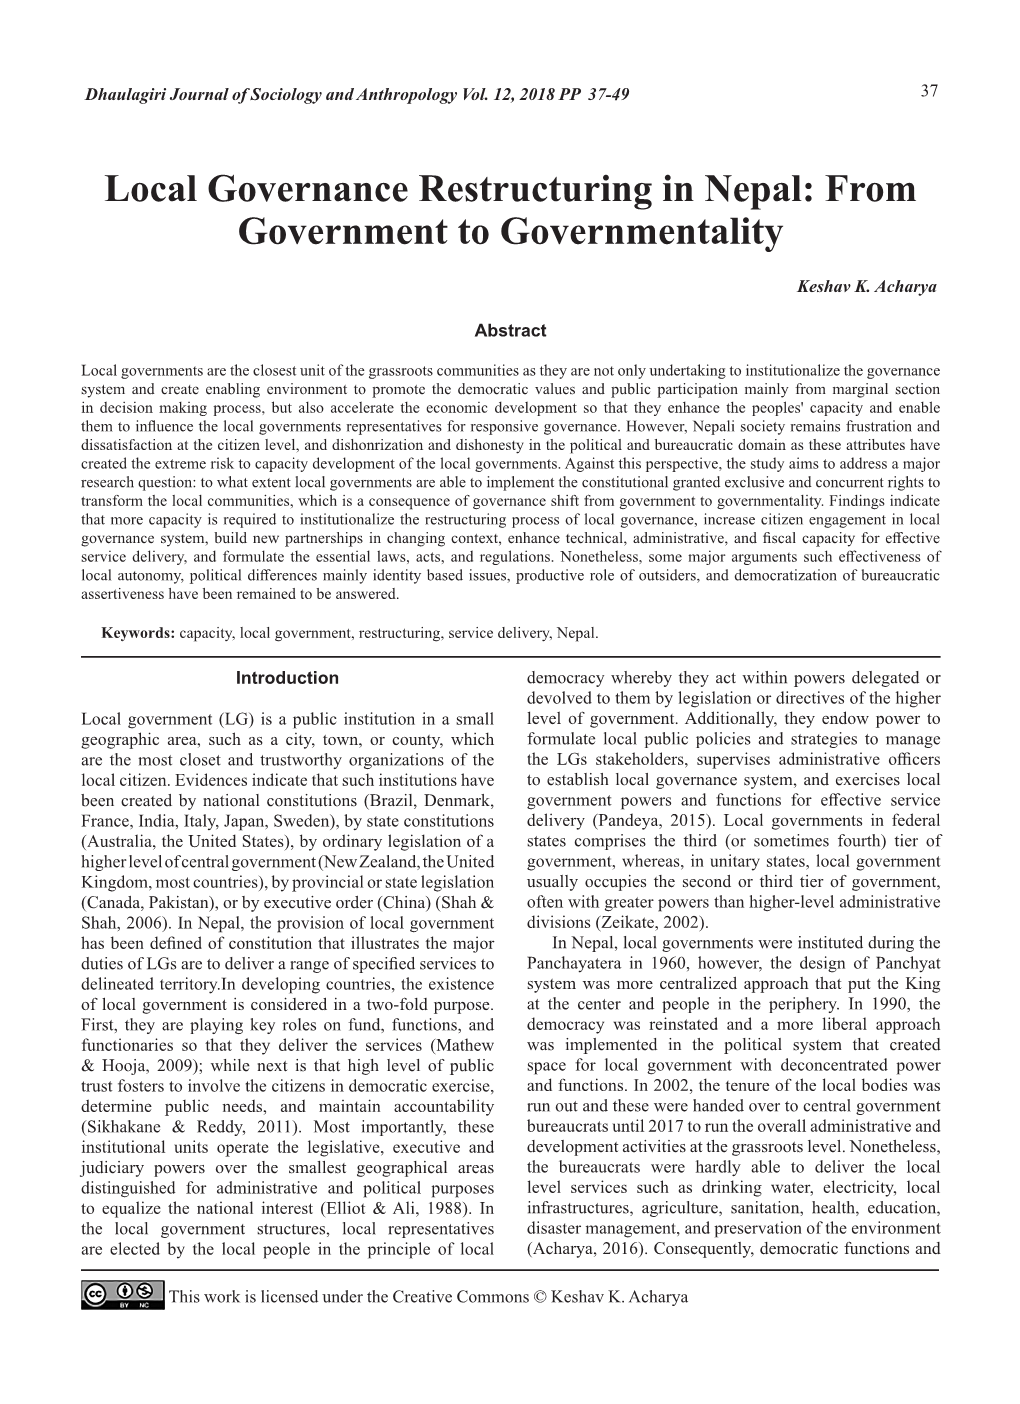 Local Governance Restructuring in Nepal: from Government to Governmentality